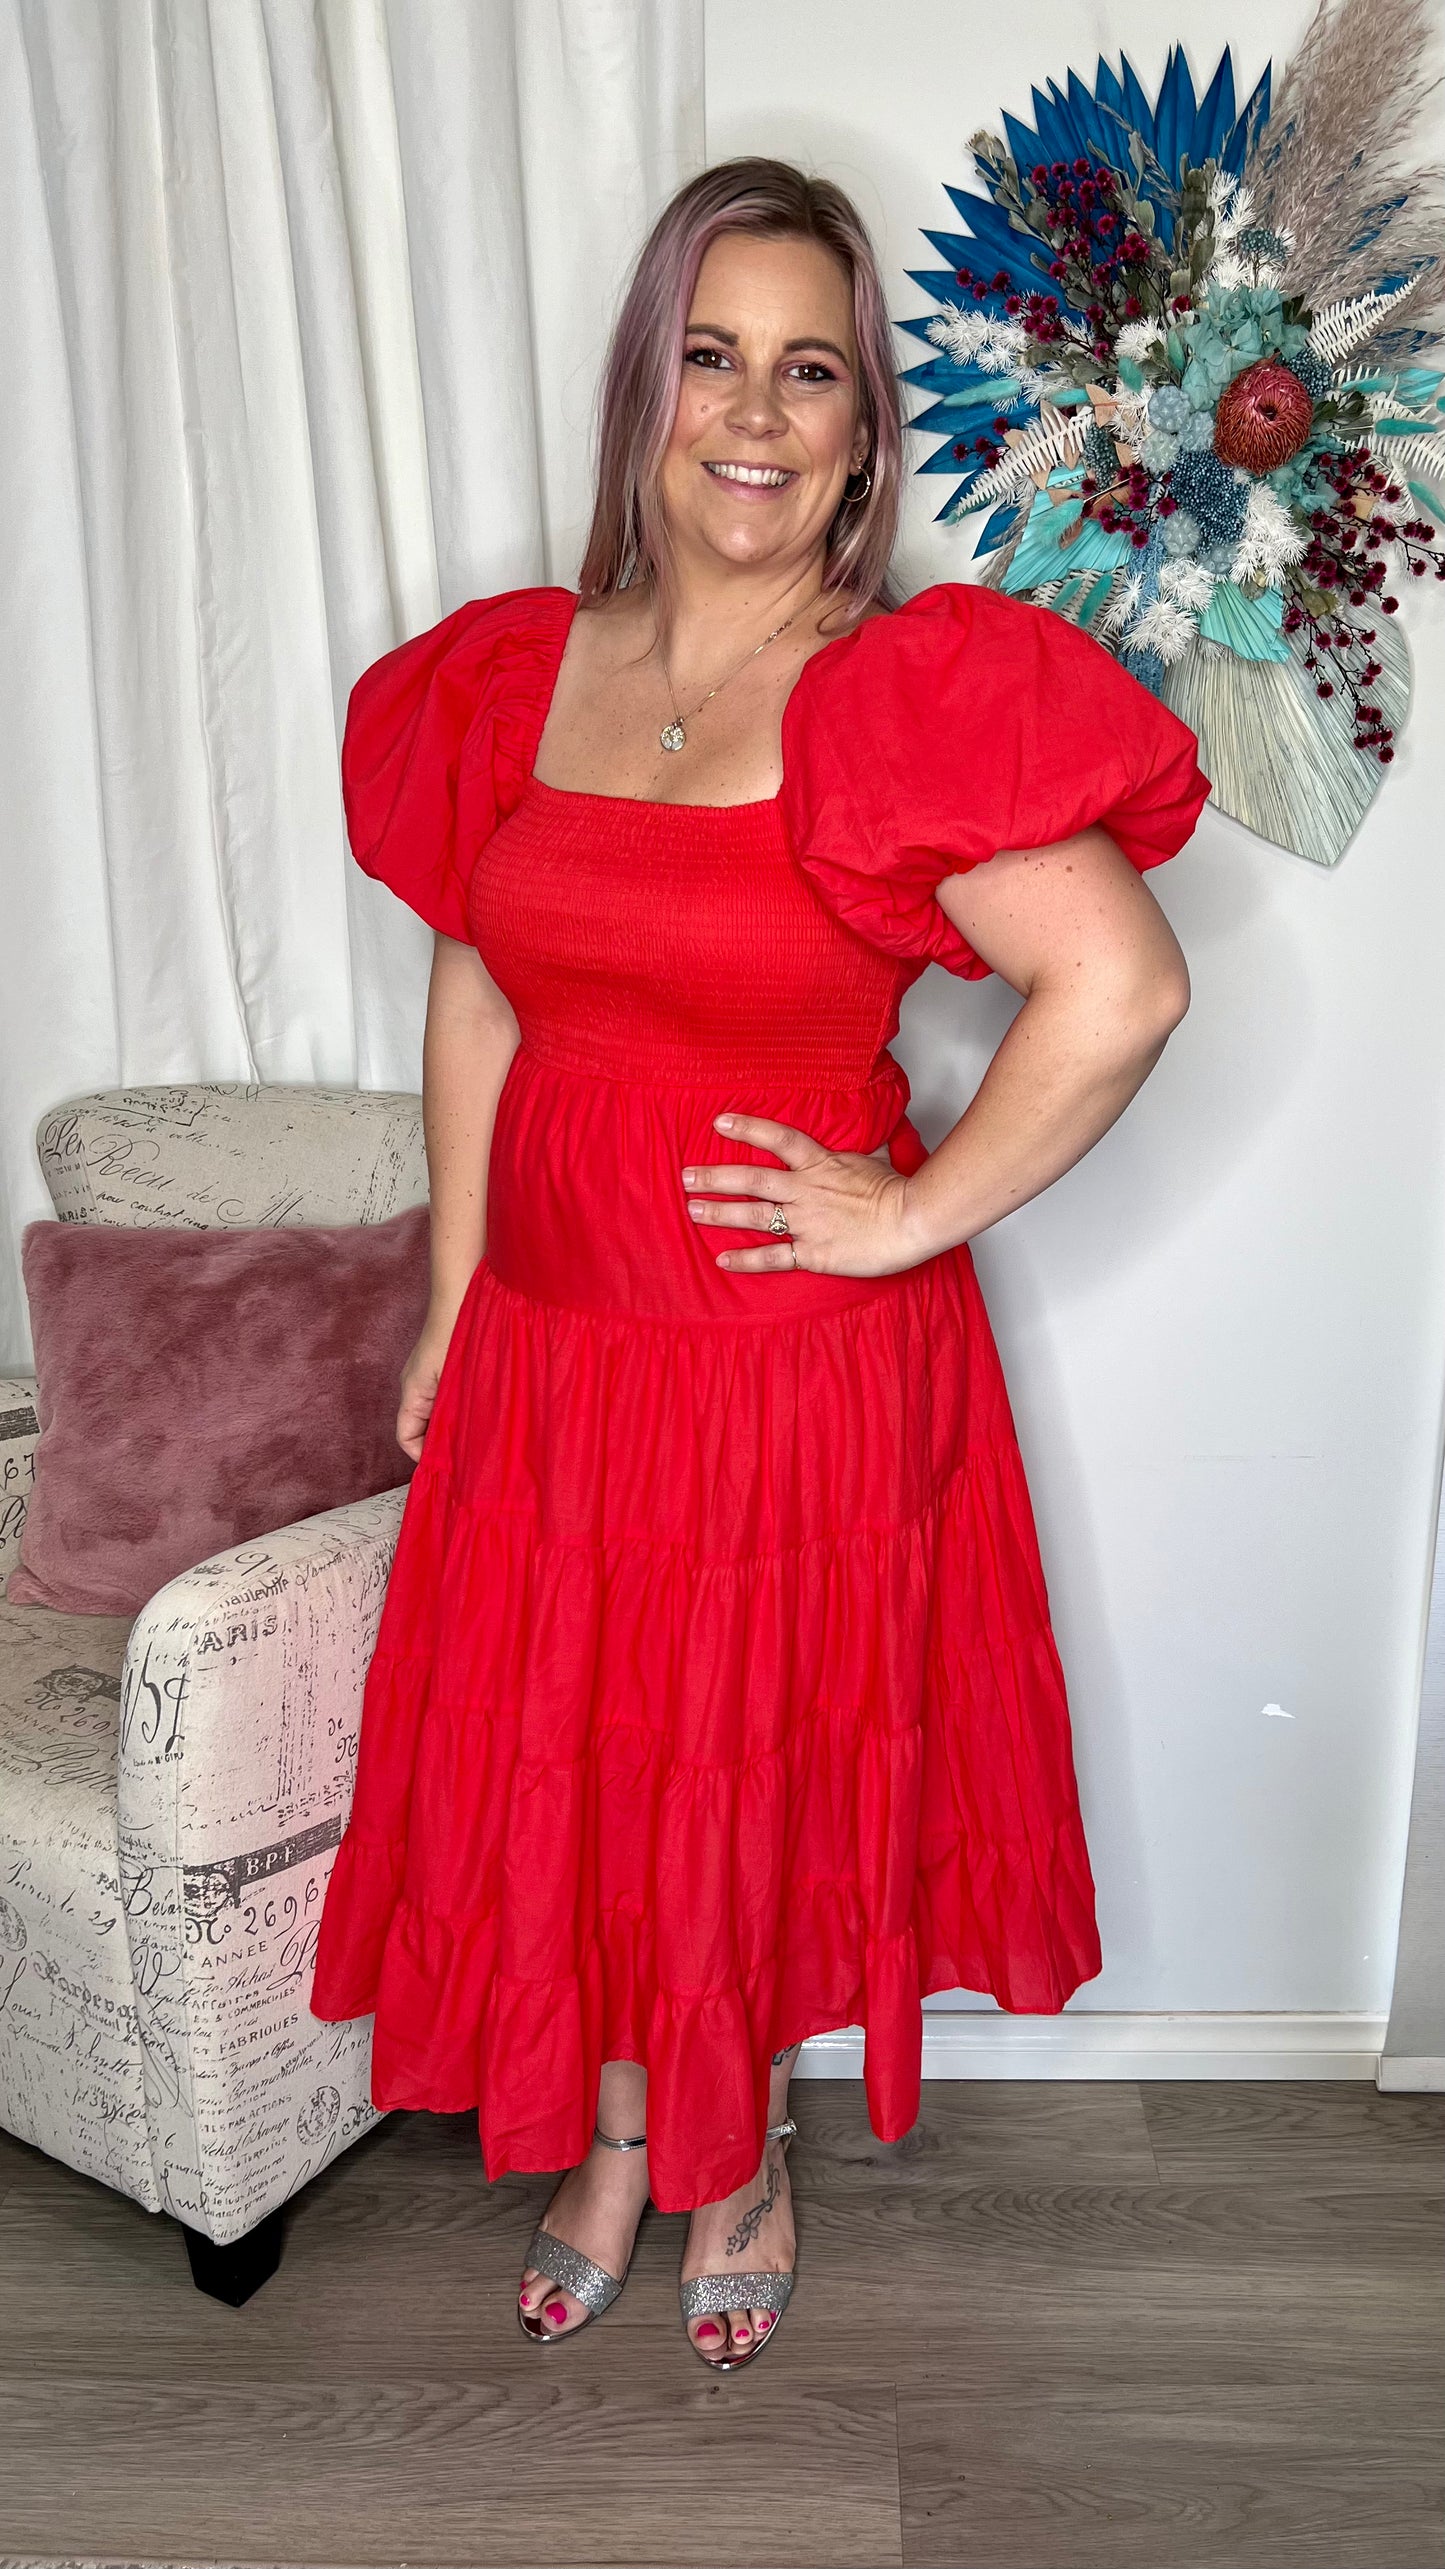 Charlotte Dress: The Charlotte Dress is made to party. It features a shirred bust, puff sleeves and a tiered skirt

Shirred bust - can pull down to breastfeed
Puff sleeves can be wor - Ciao Bella Dresses 